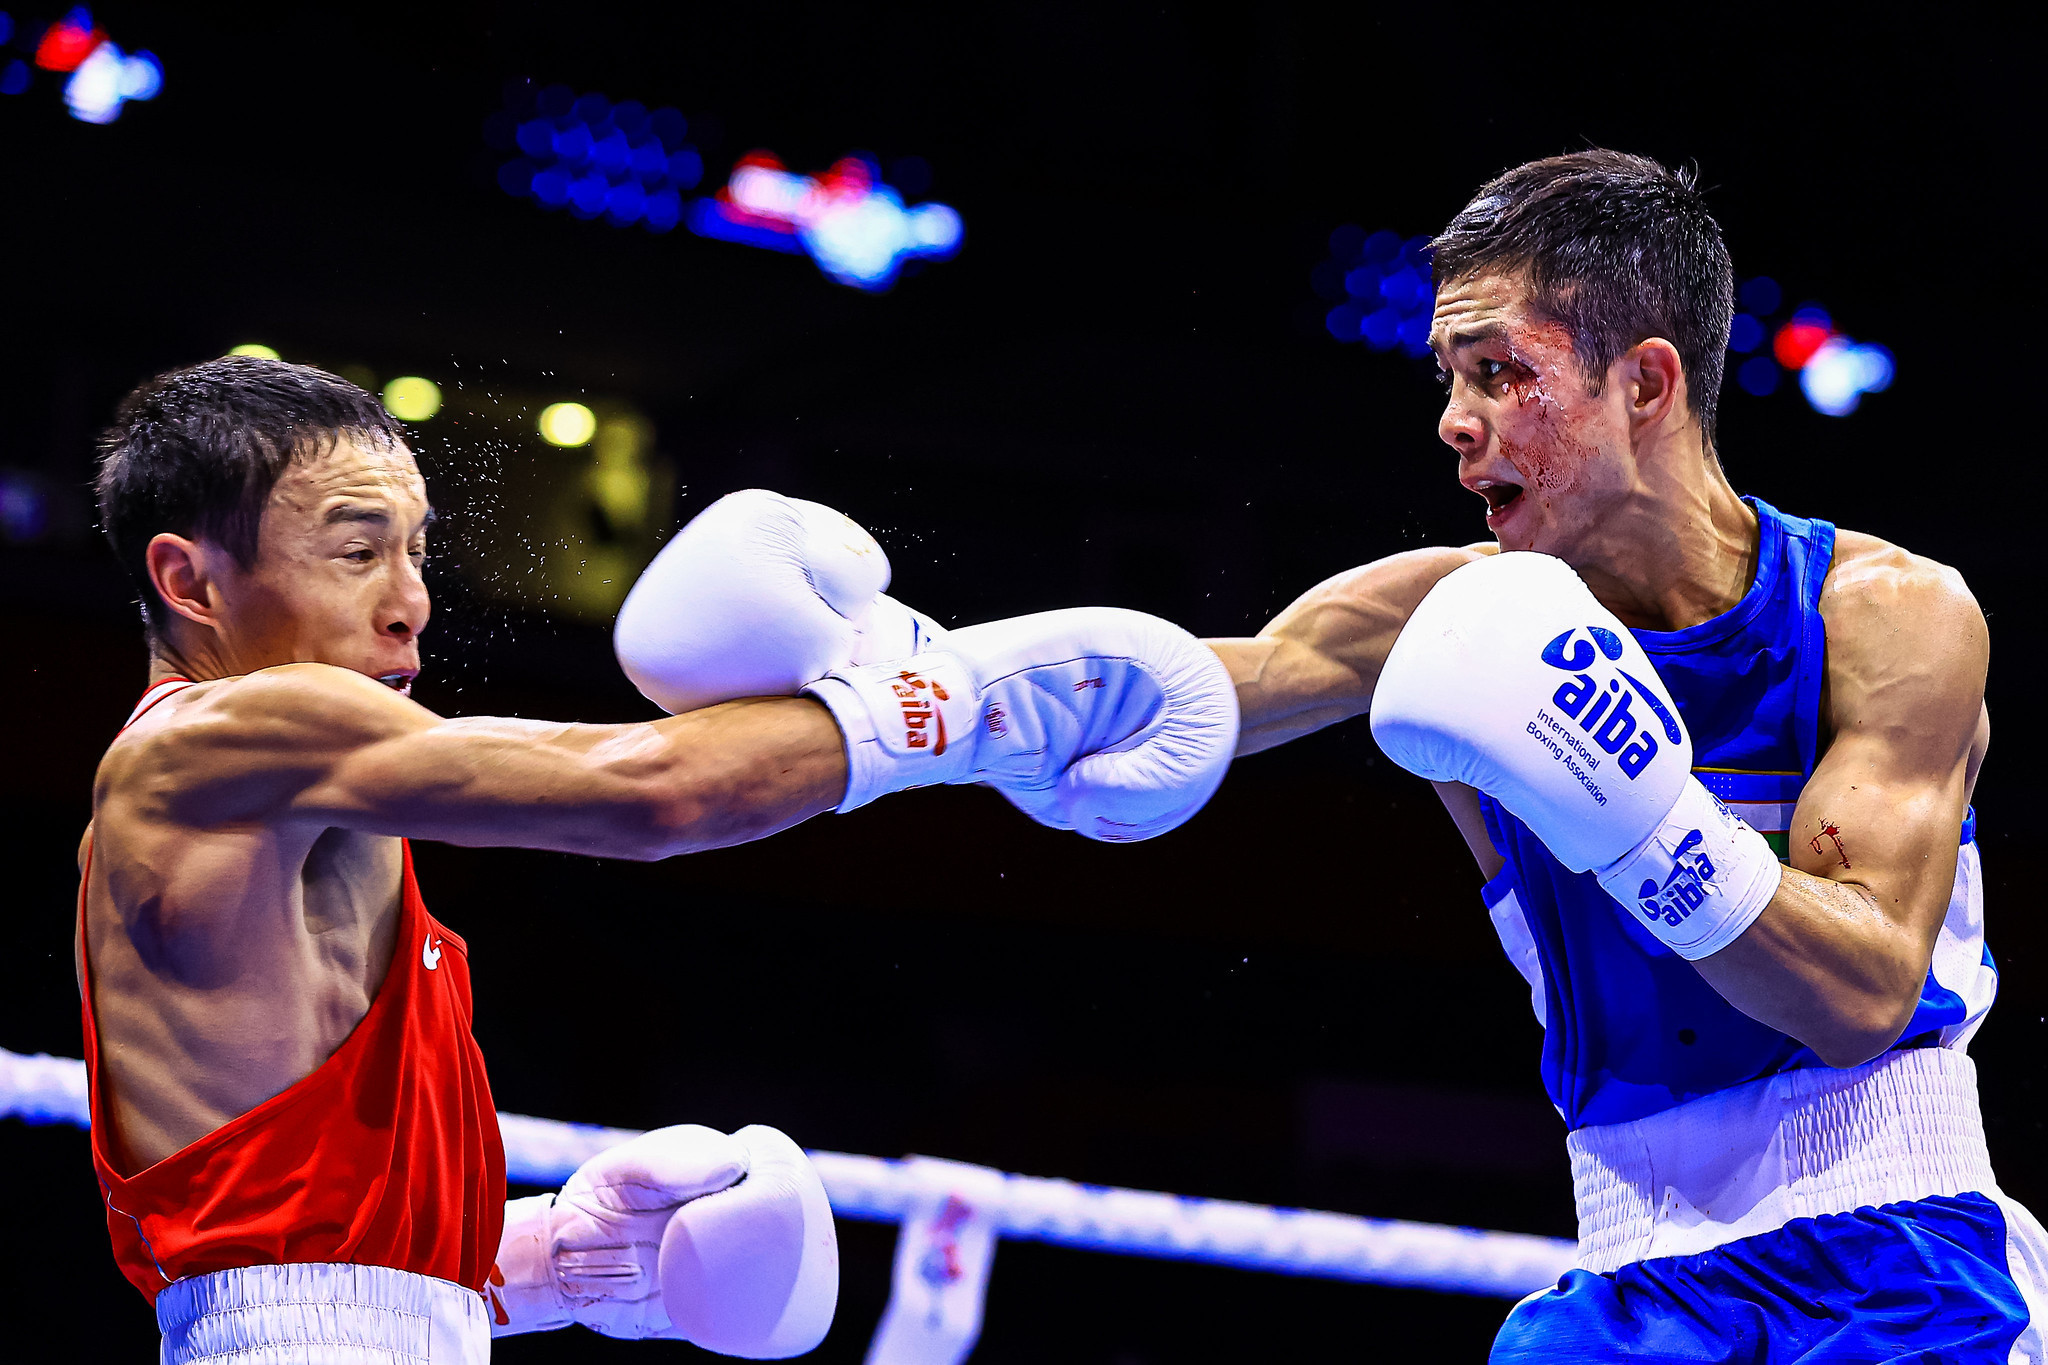 insidethegames is reporting LIVE from the AIBA Men's World Boxing Championships in Belgrade